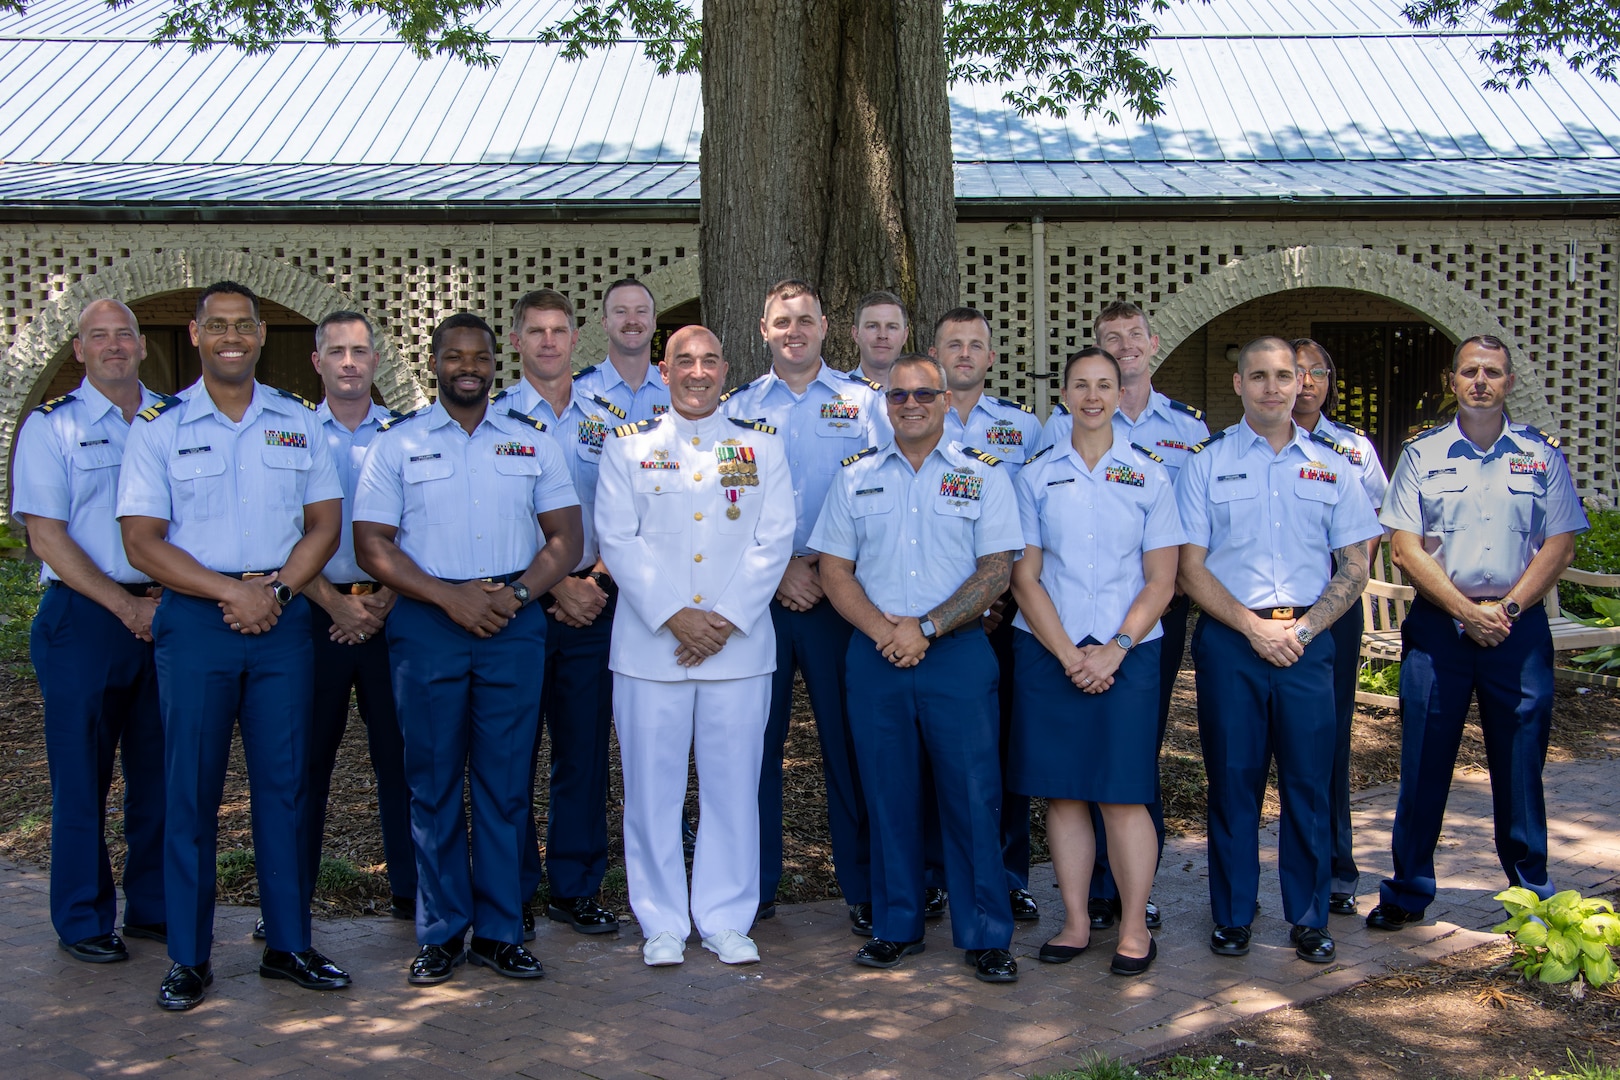 Cmdr. James Lovenstein stands with members from the Port Security Unit 305’s wardroom following PSU 305’s change of command ceremony in Newport News, Virginia, June 27, 2023. Cmdr. John Elkins relieved Cmdr. Lovenstein as the commanding officer of PSU 305, Capt. Jason Ryan, chief of Pacific Area operations, presided over the ceremony. U.S. Coast Guard courtesy photo.